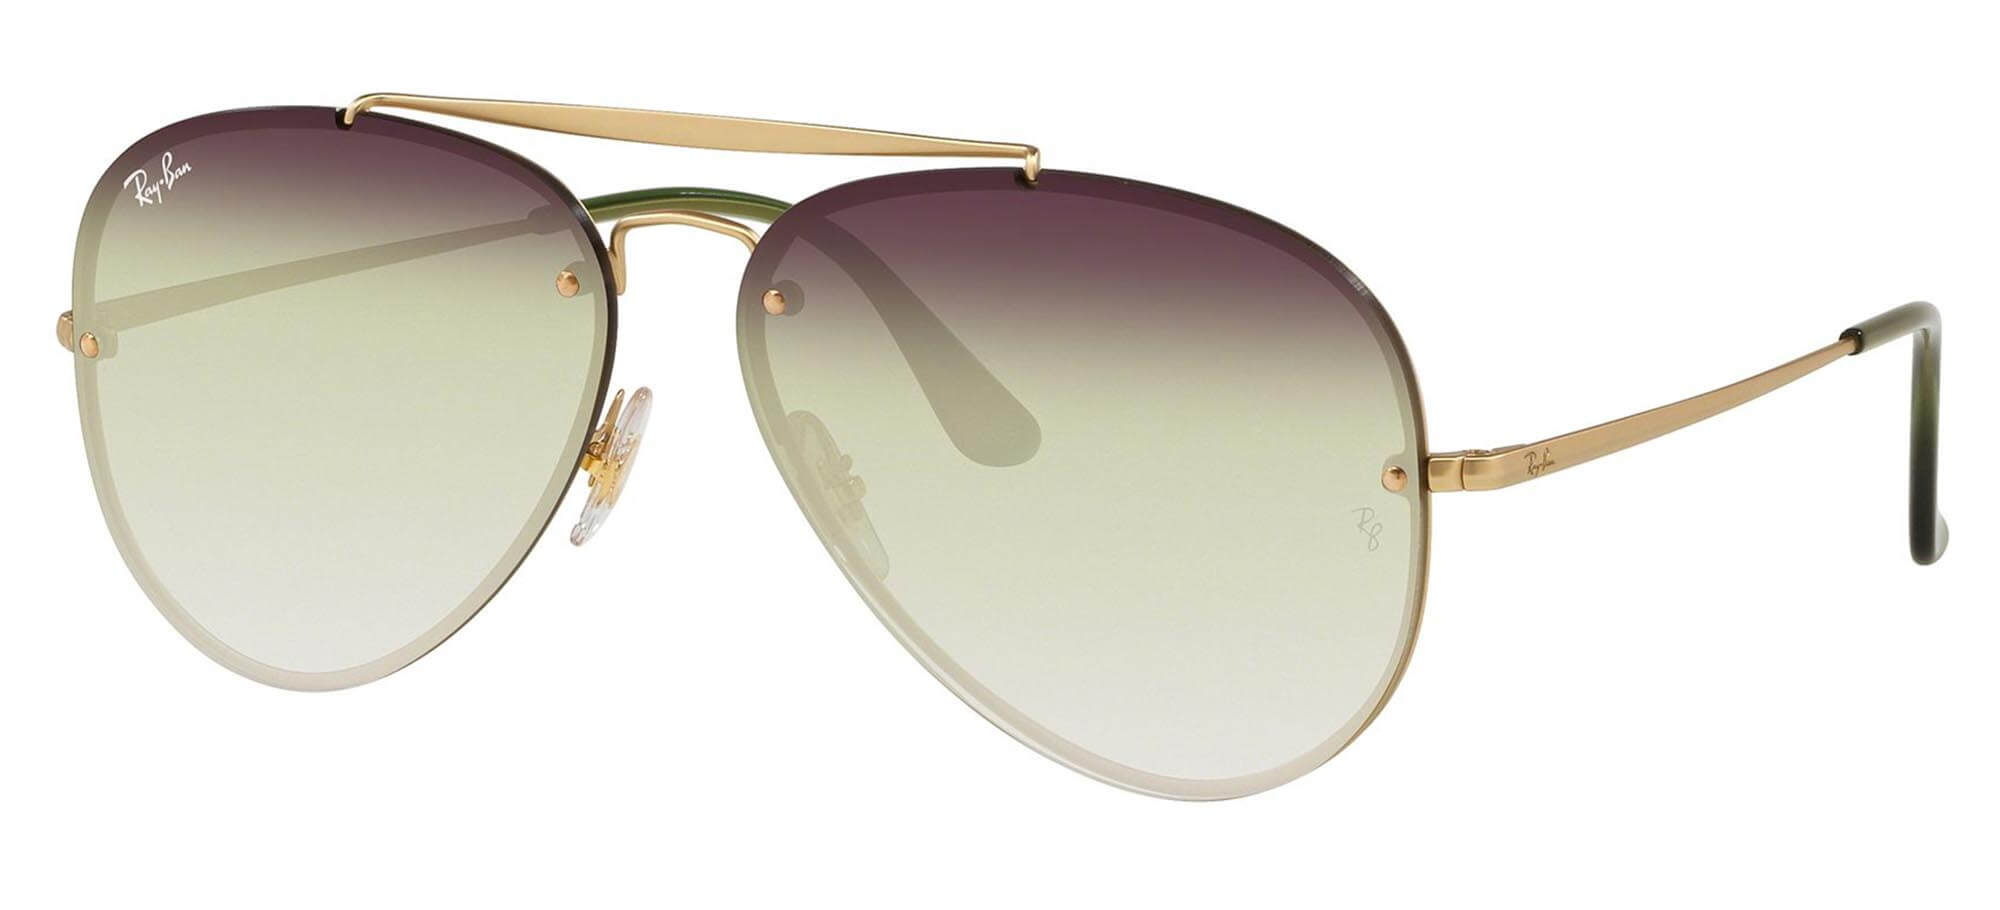 Ray-BanBLAZE LARGE AVIATOR RB 3584NGold/grey Green Shaded (9140/0R)